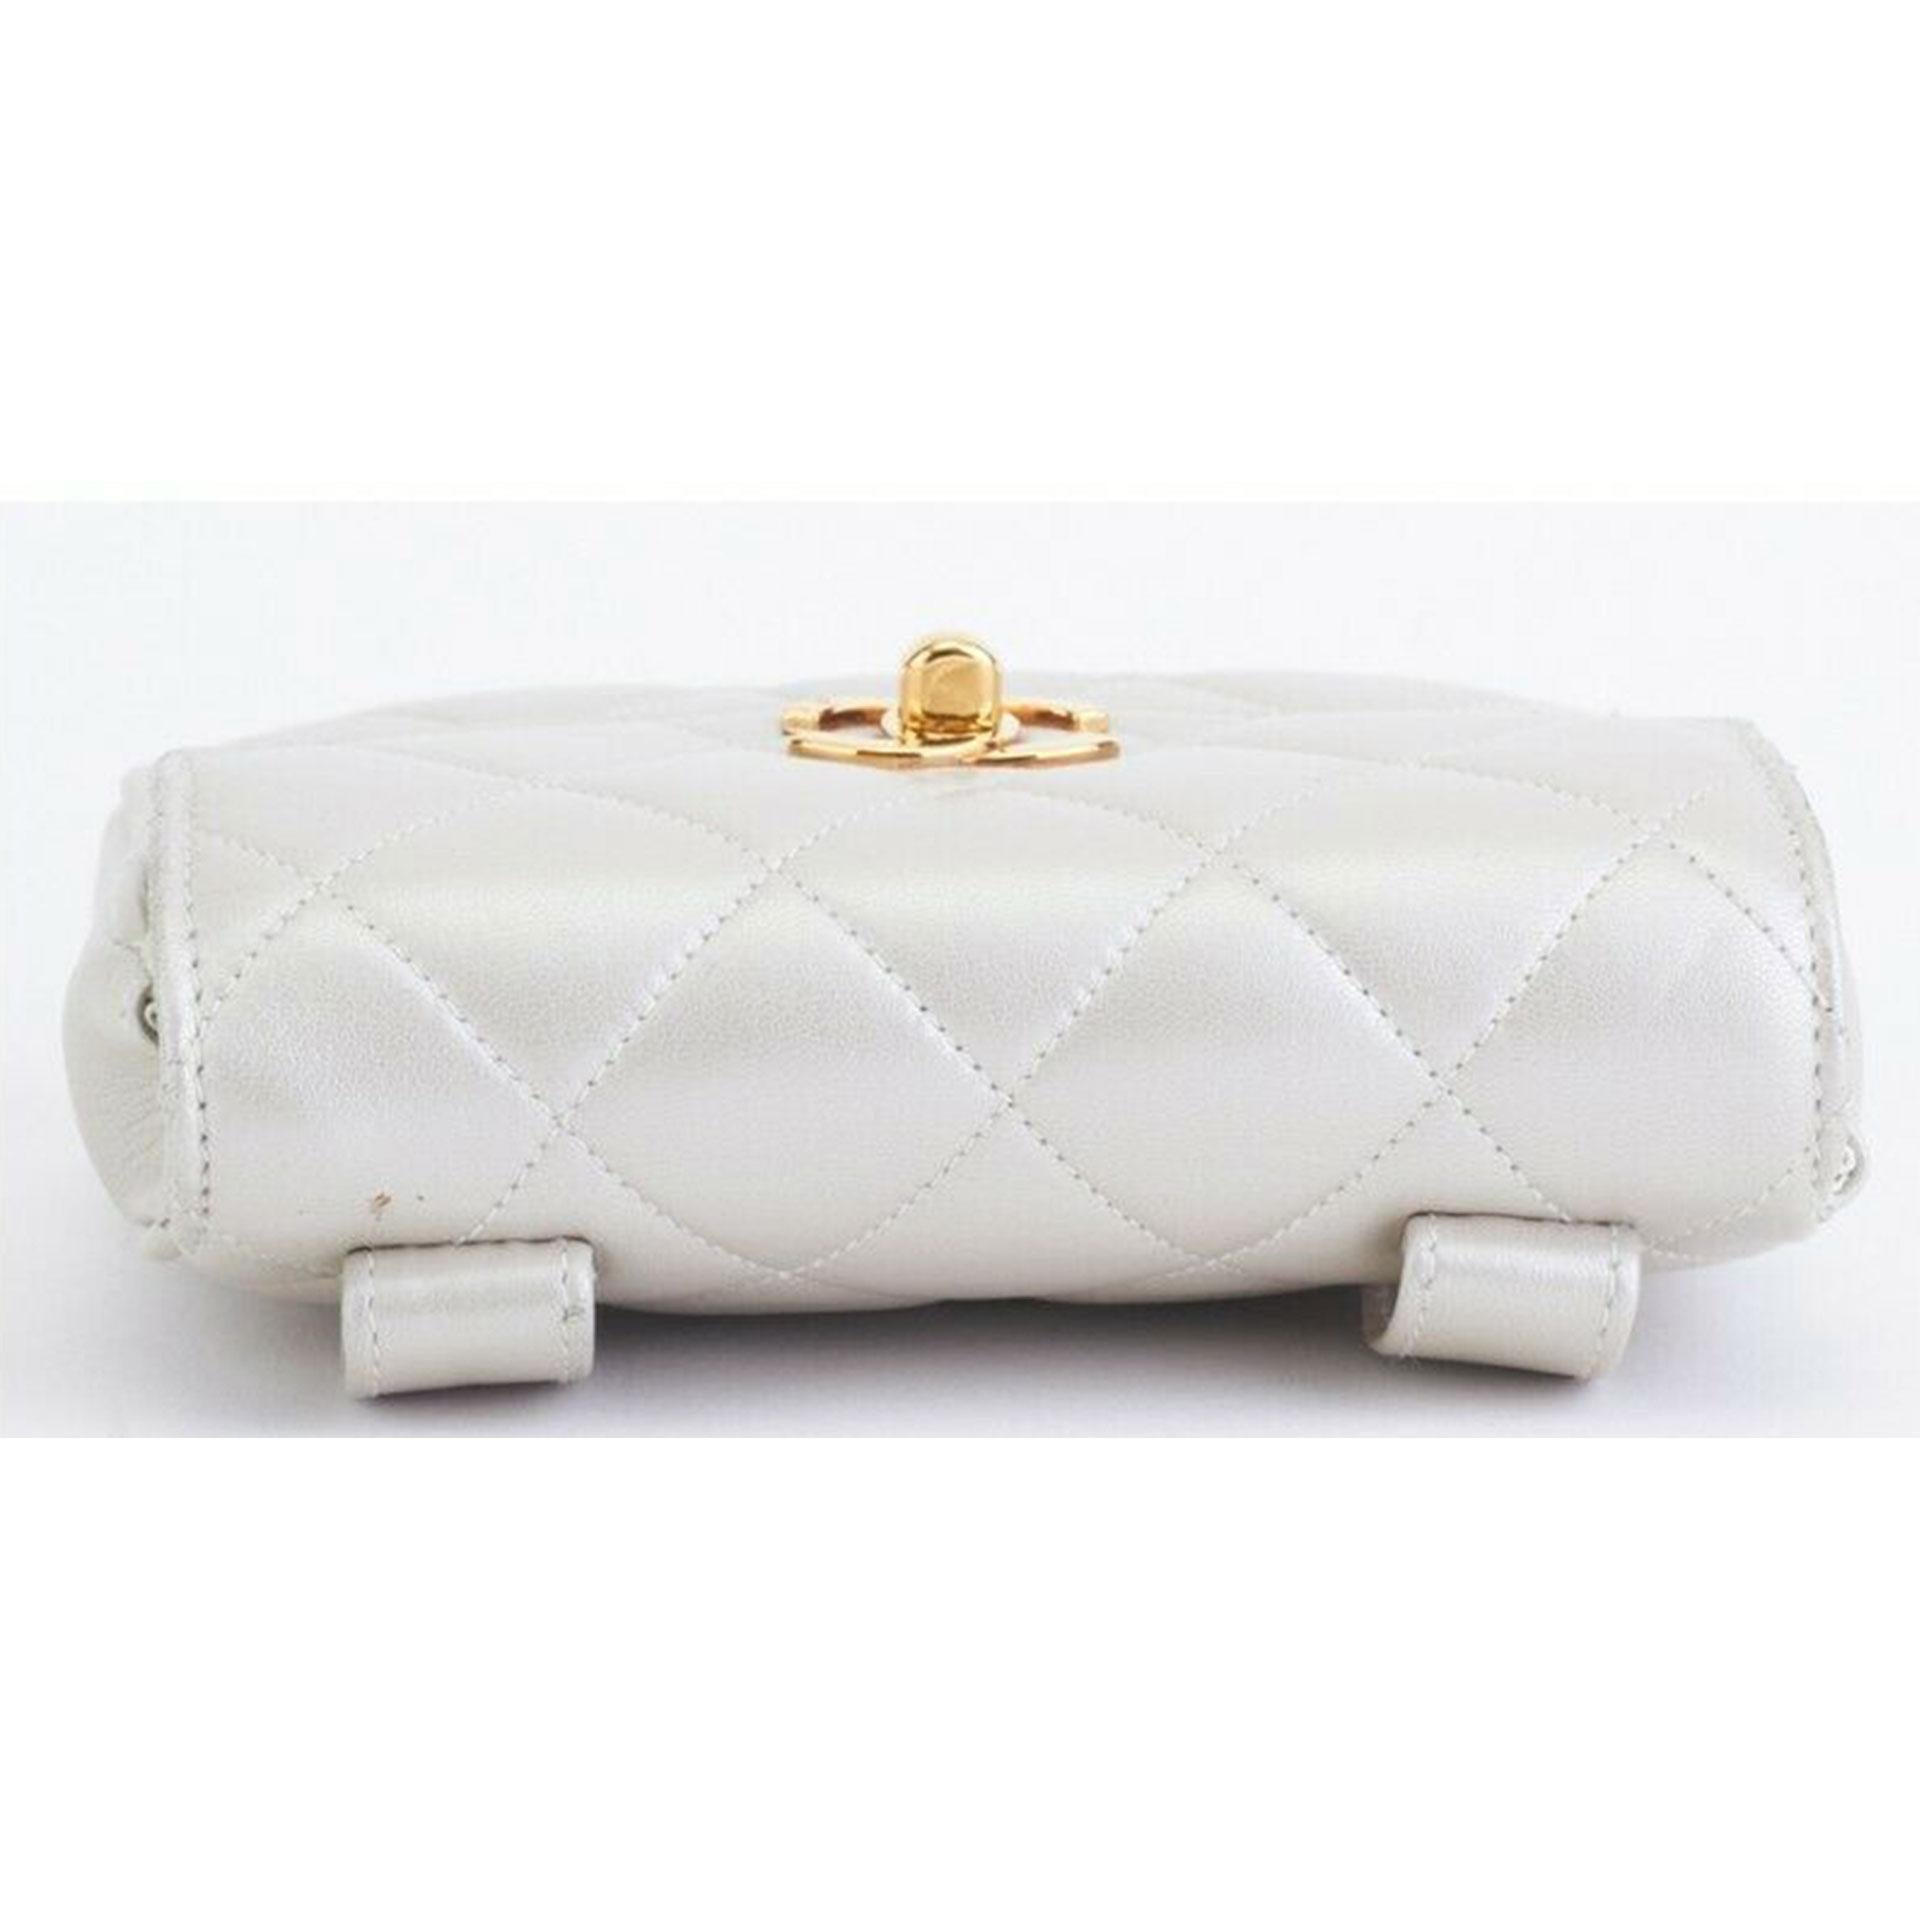 Chanel Rare Vintage Iridescent Champagne Pearl Mini Belt Bum Bag Fanny Pack For Sale 1